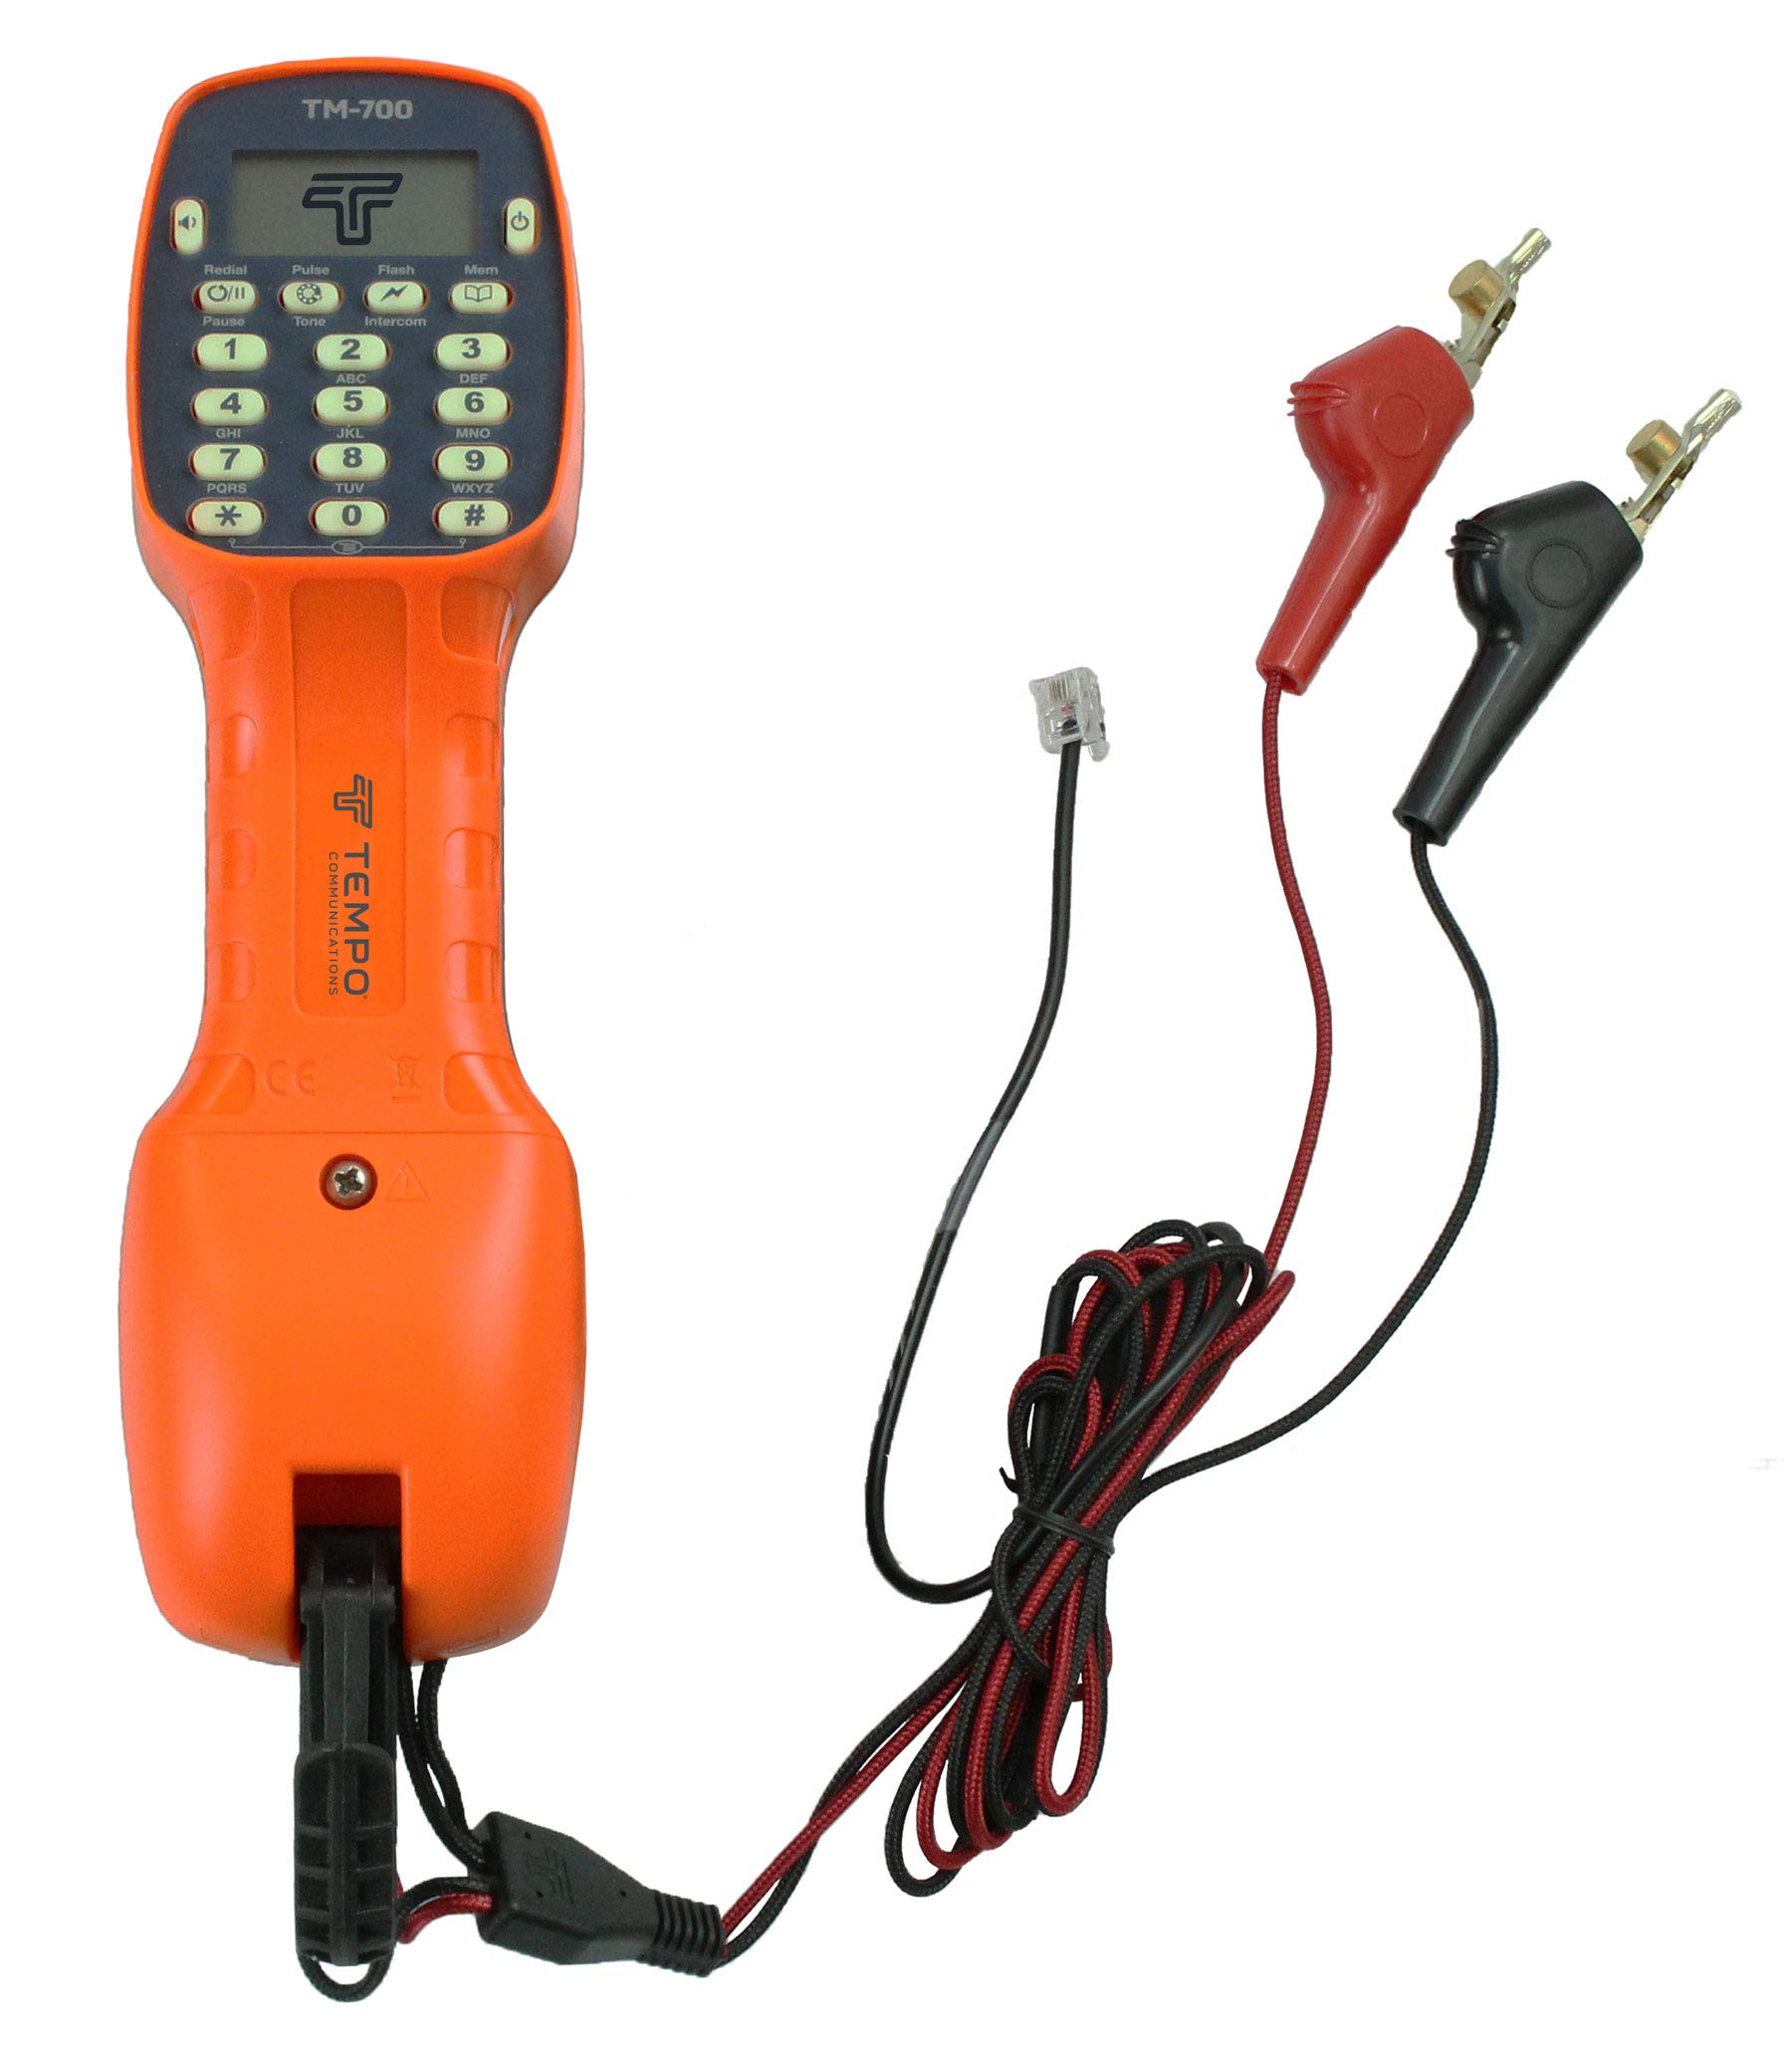 TEMPO TM-700 Lineman Telephone Test Set with LCD Display and ABN Clips - Professional Grade (Latest Model)